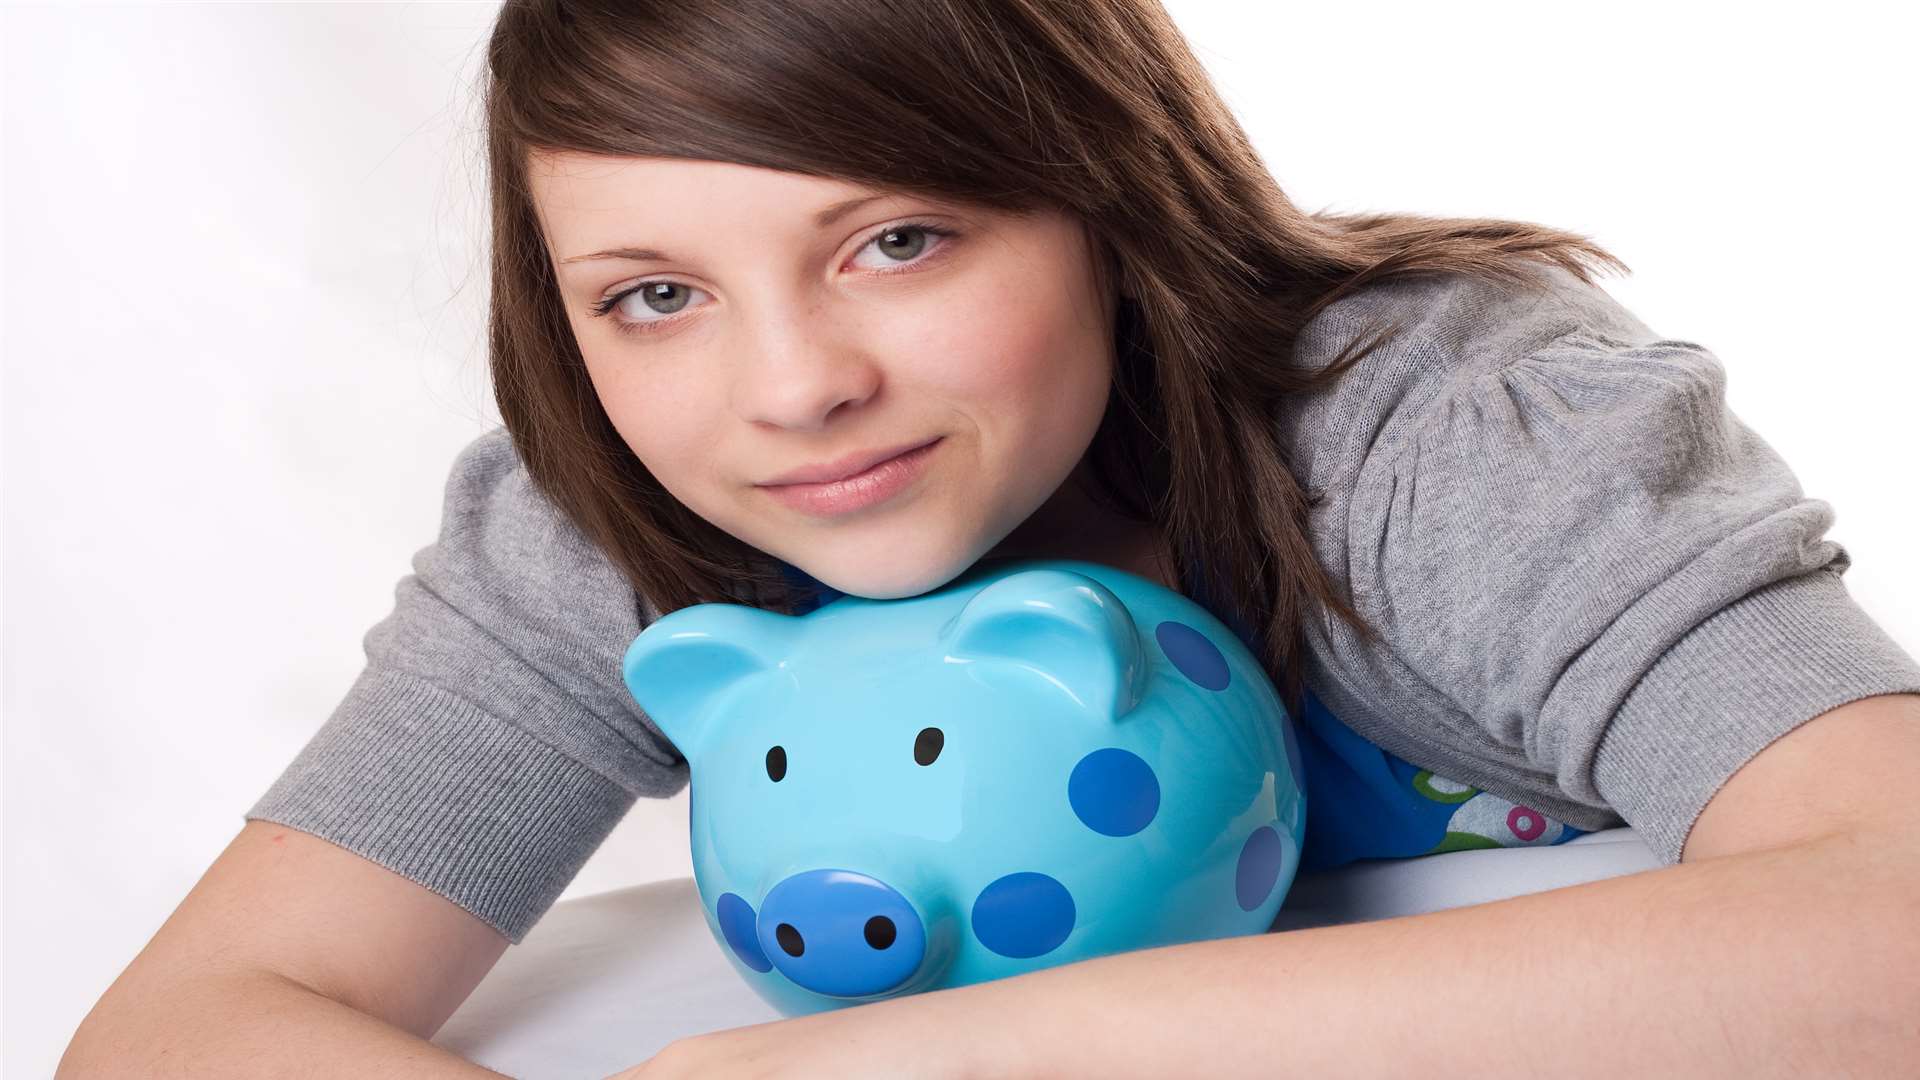 If you give your children pocket money, encourage them to put some of it aside as savings